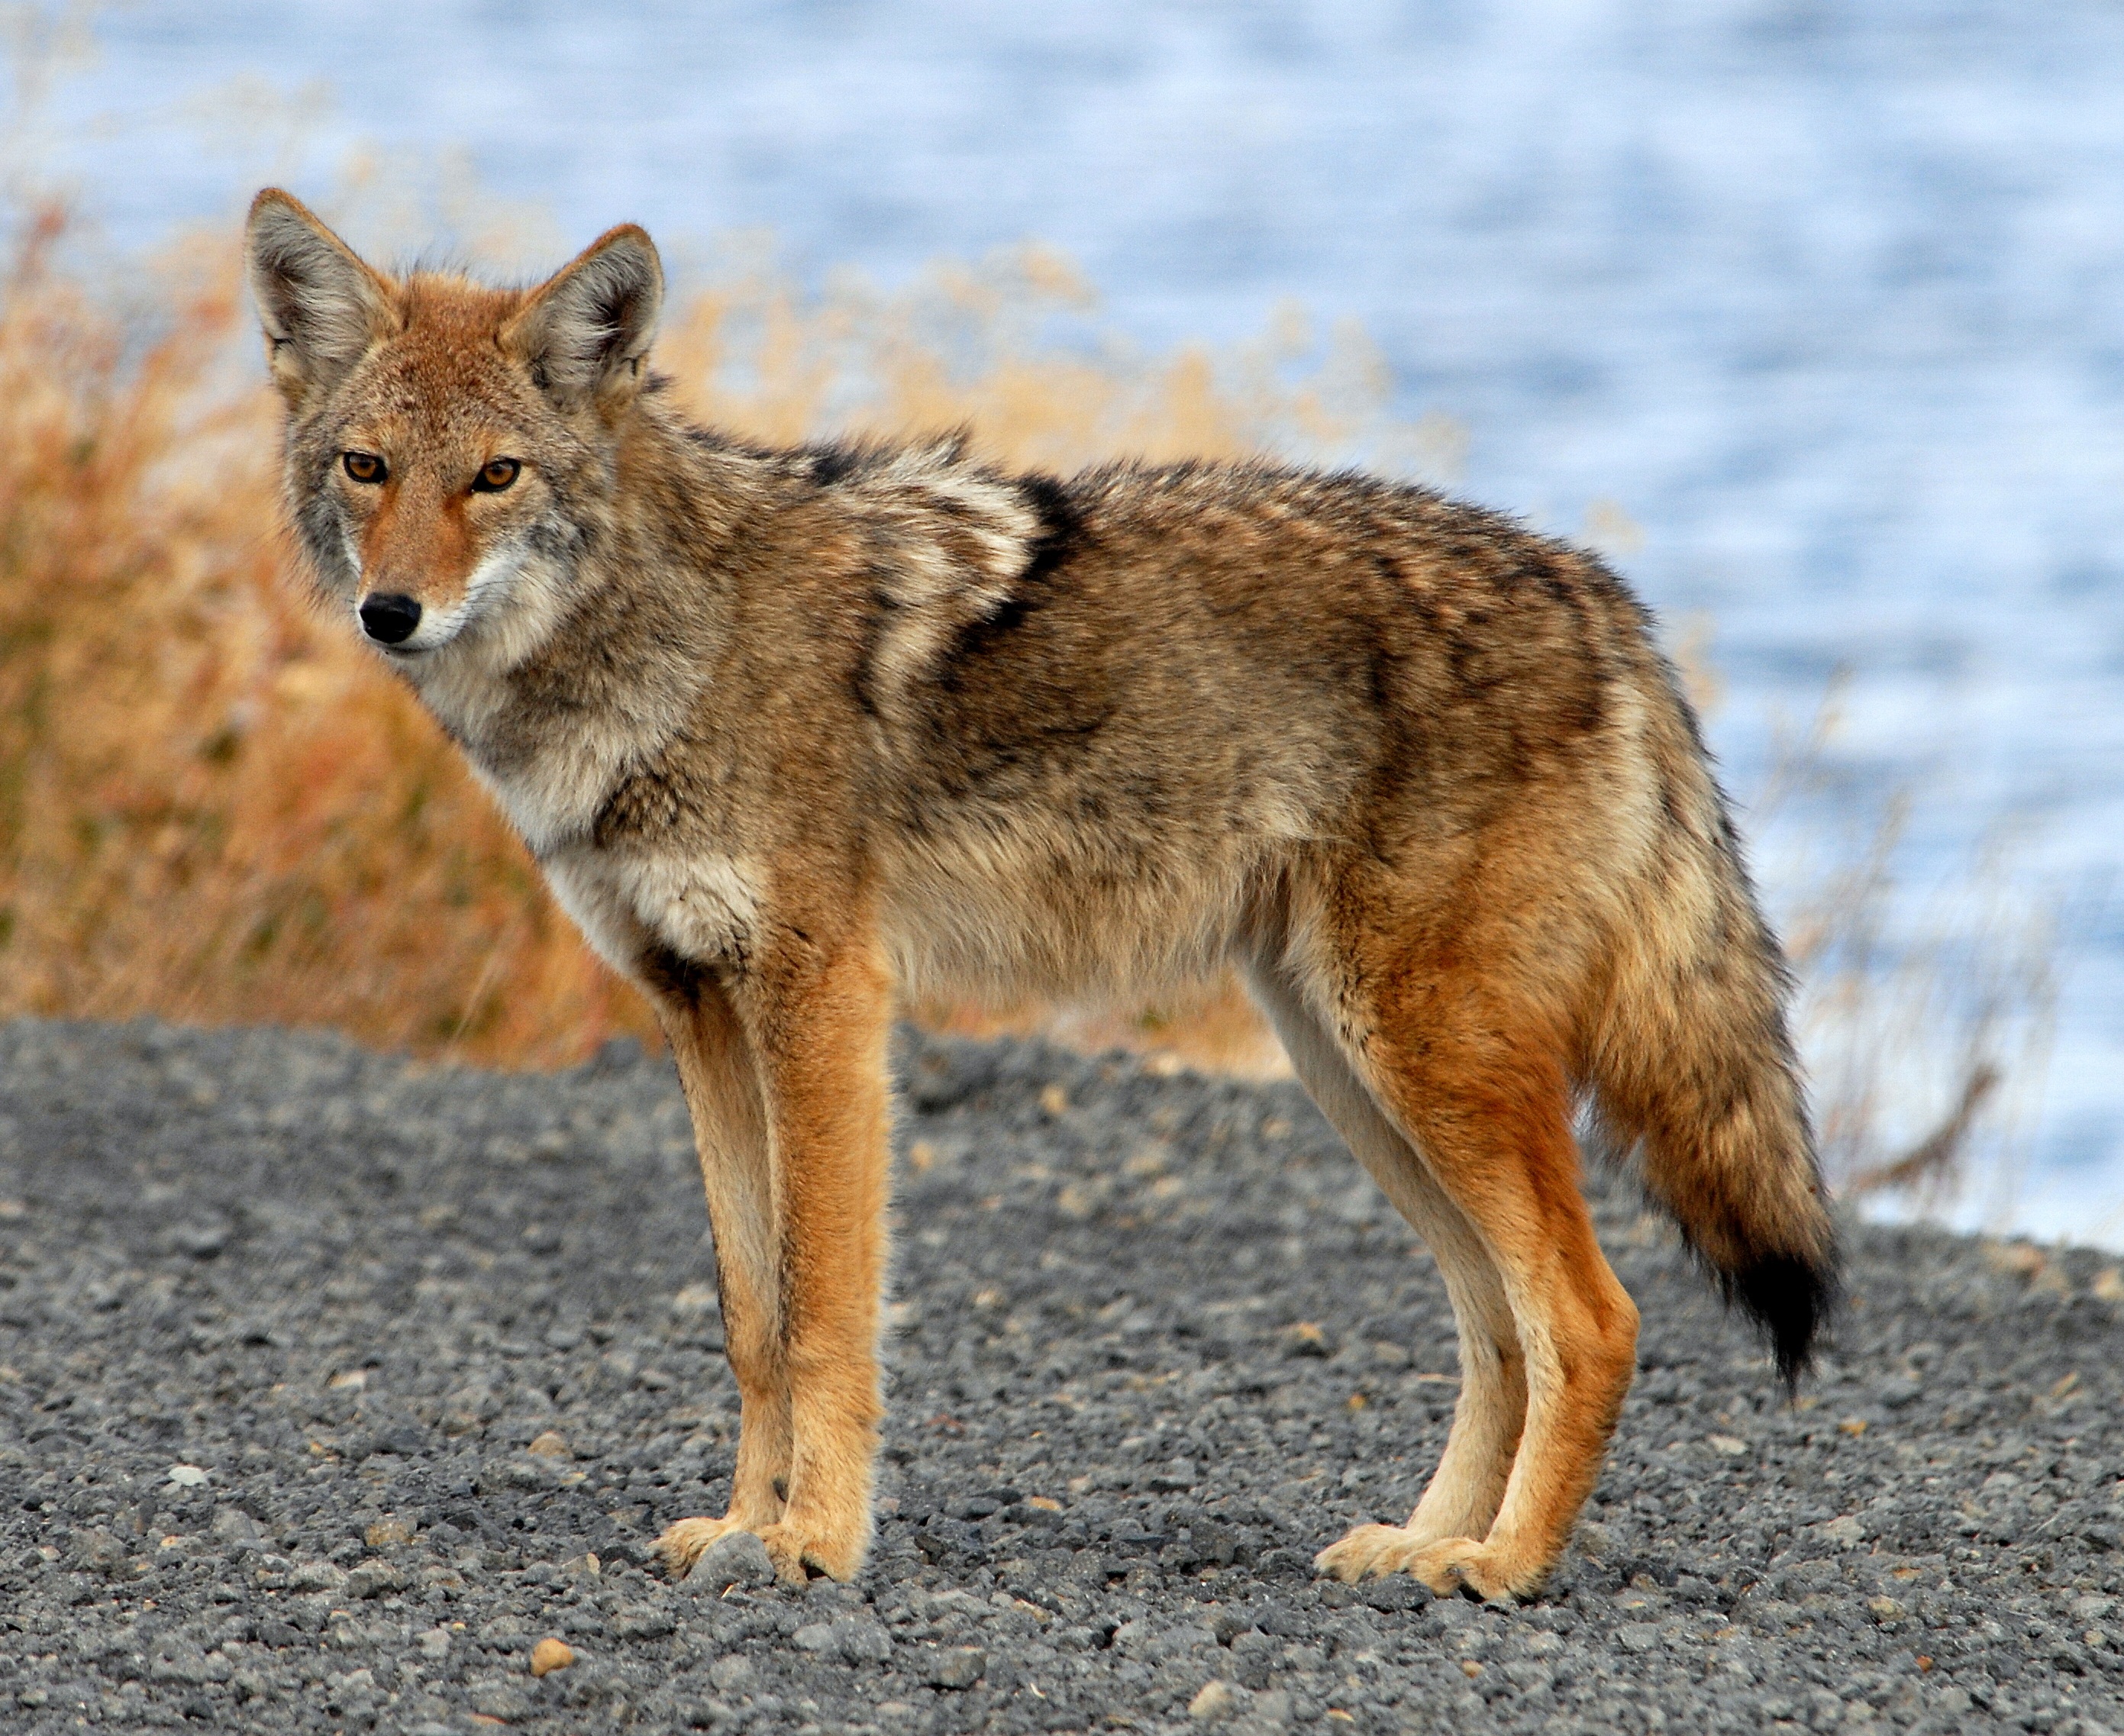 Fairfax Co. police plead with residents to stop feeding coyotes